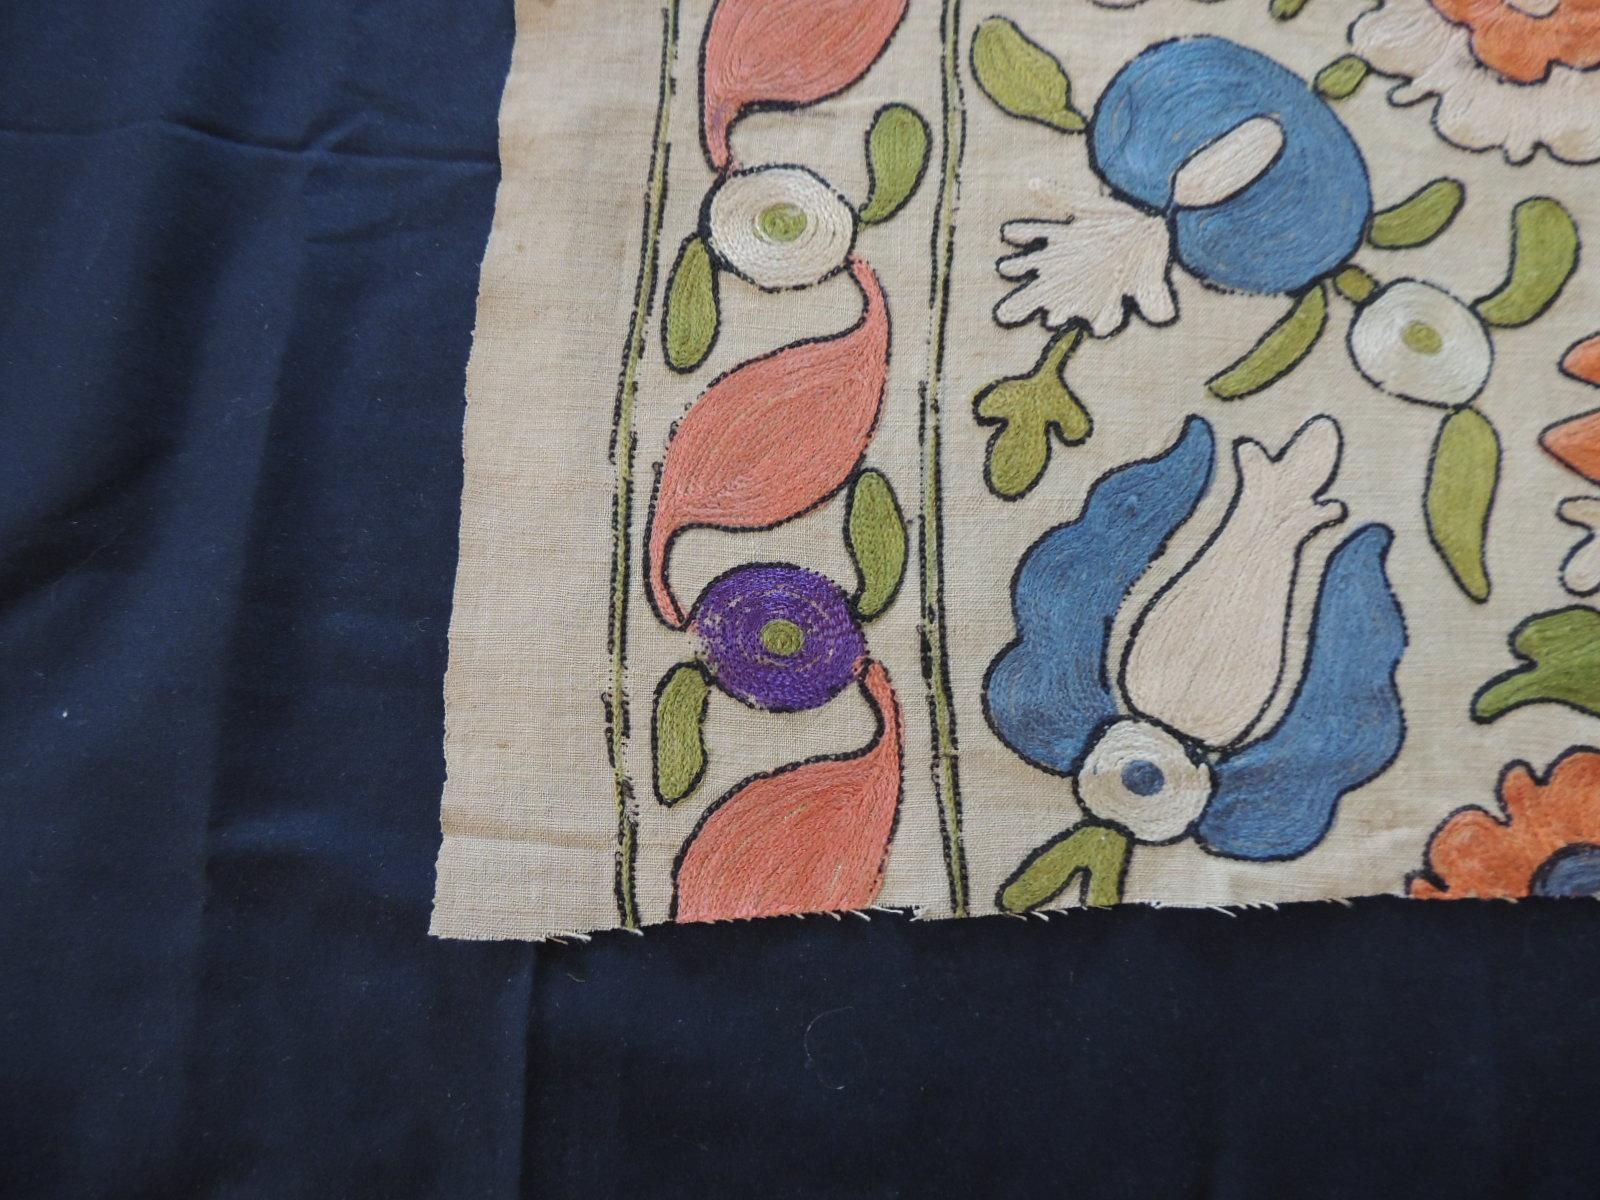 Antique embroidered floral silk Suzani textile fragment.
In shades of orange, natural, blue, red, yellow and green.
Ideal to make a pillow.
Size: 16